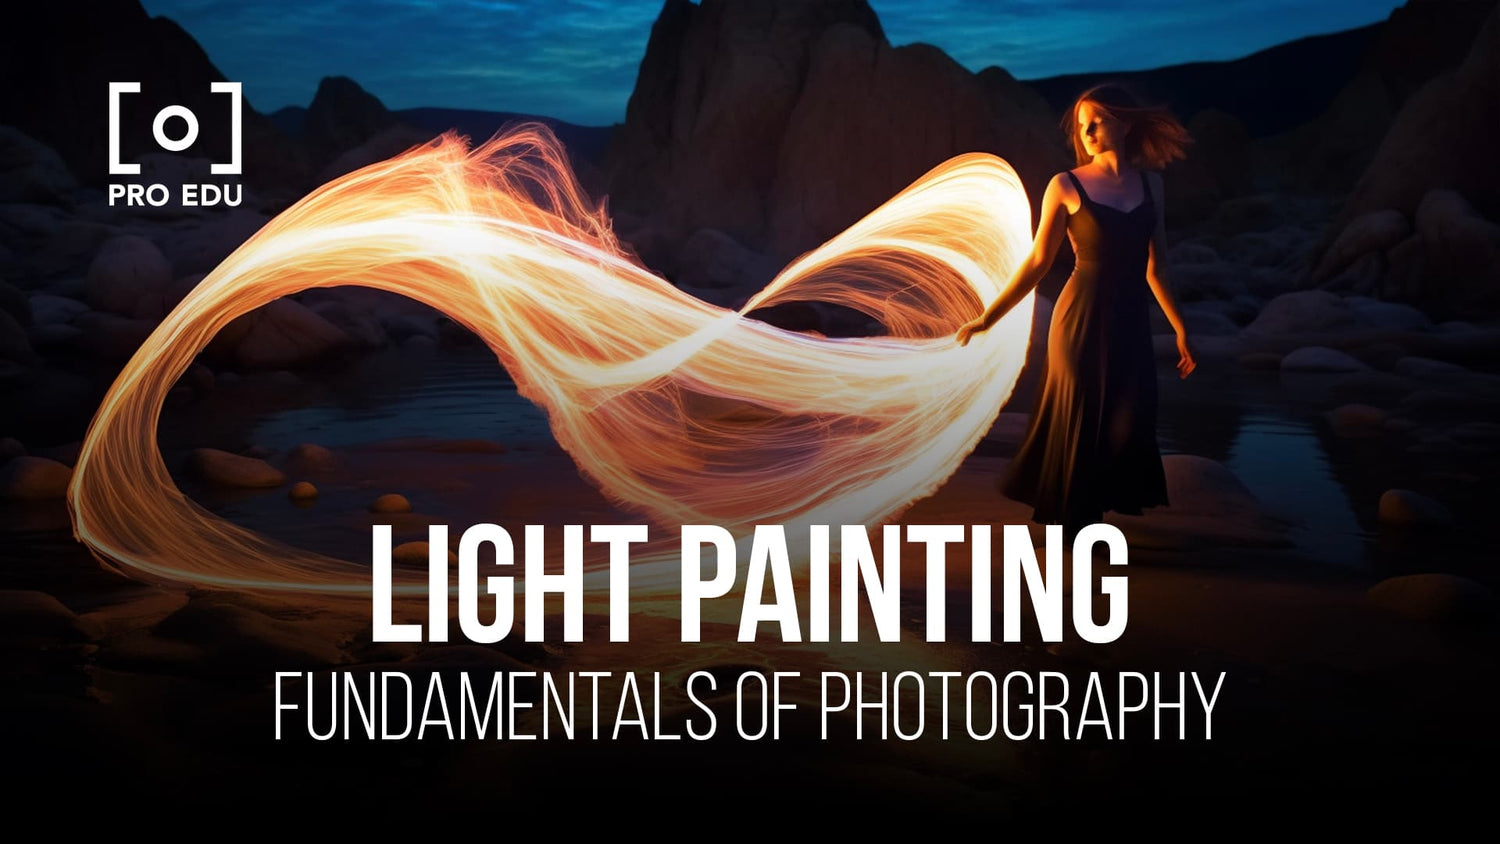 Exploring the creative technique of light painting in photography